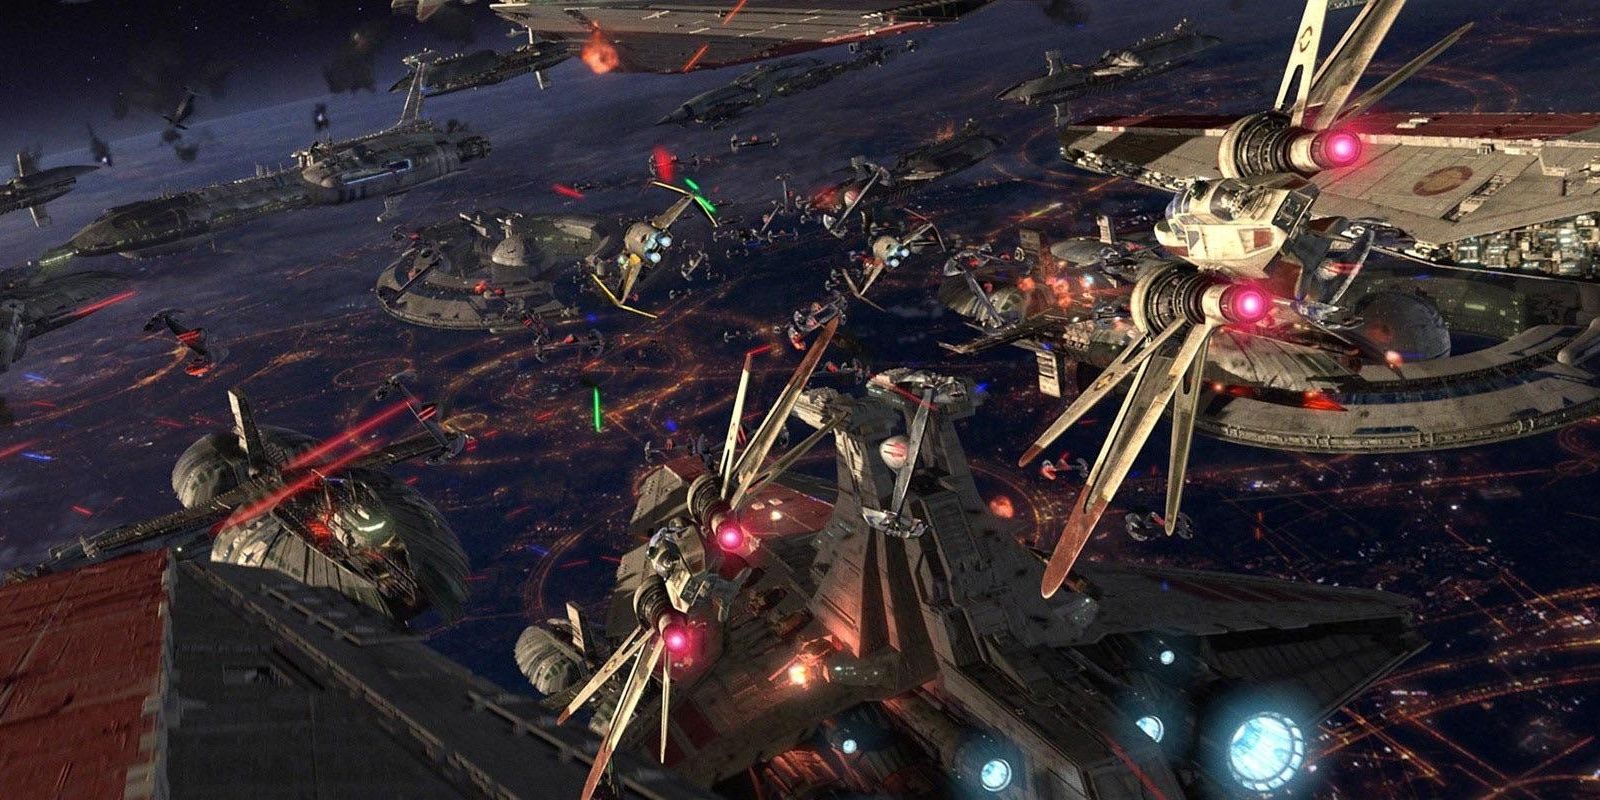 The opening space battle in Revenge of the Sith